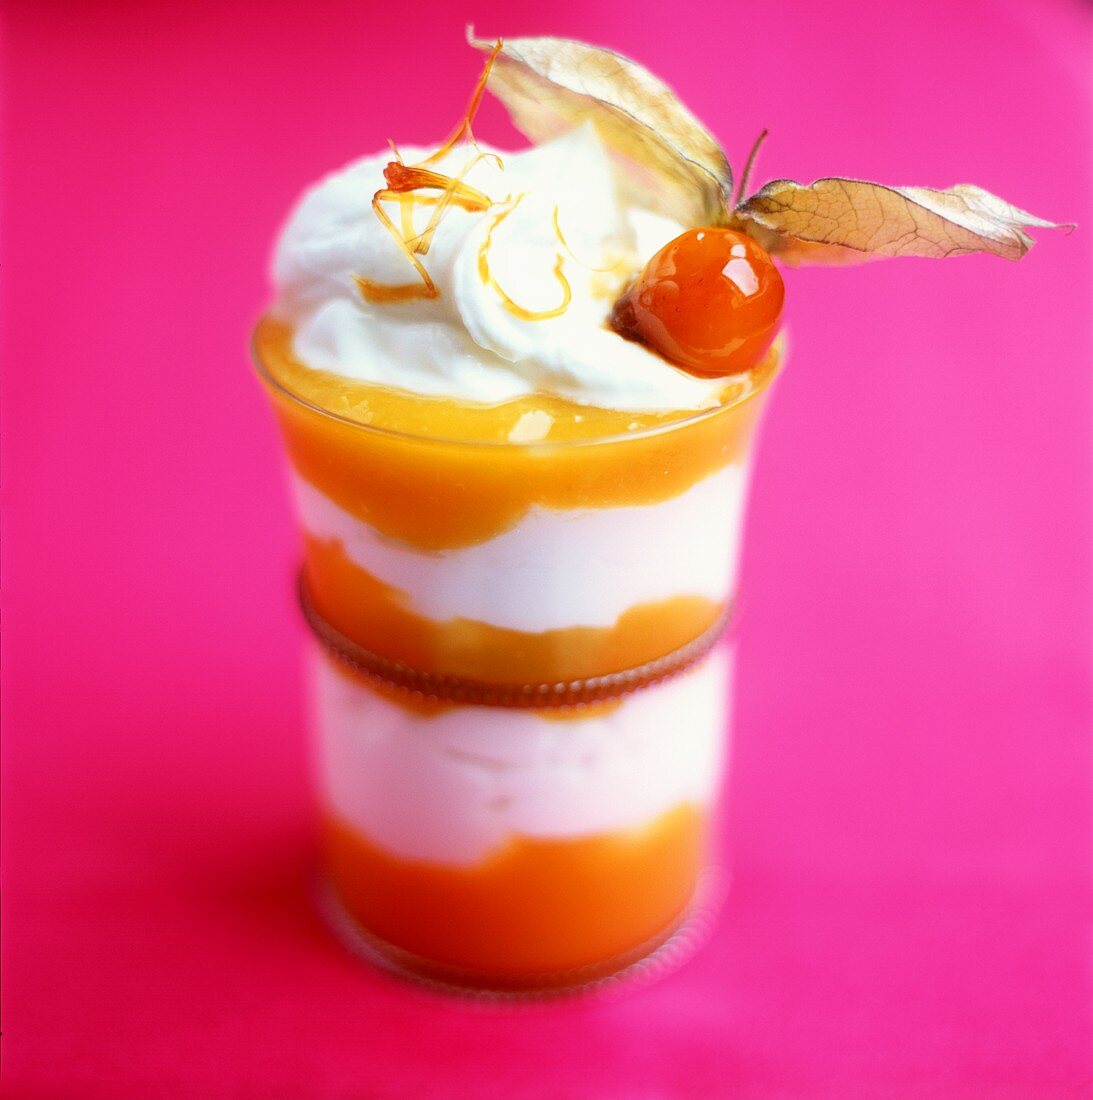 Layered physalis dessert with quark and cream topping